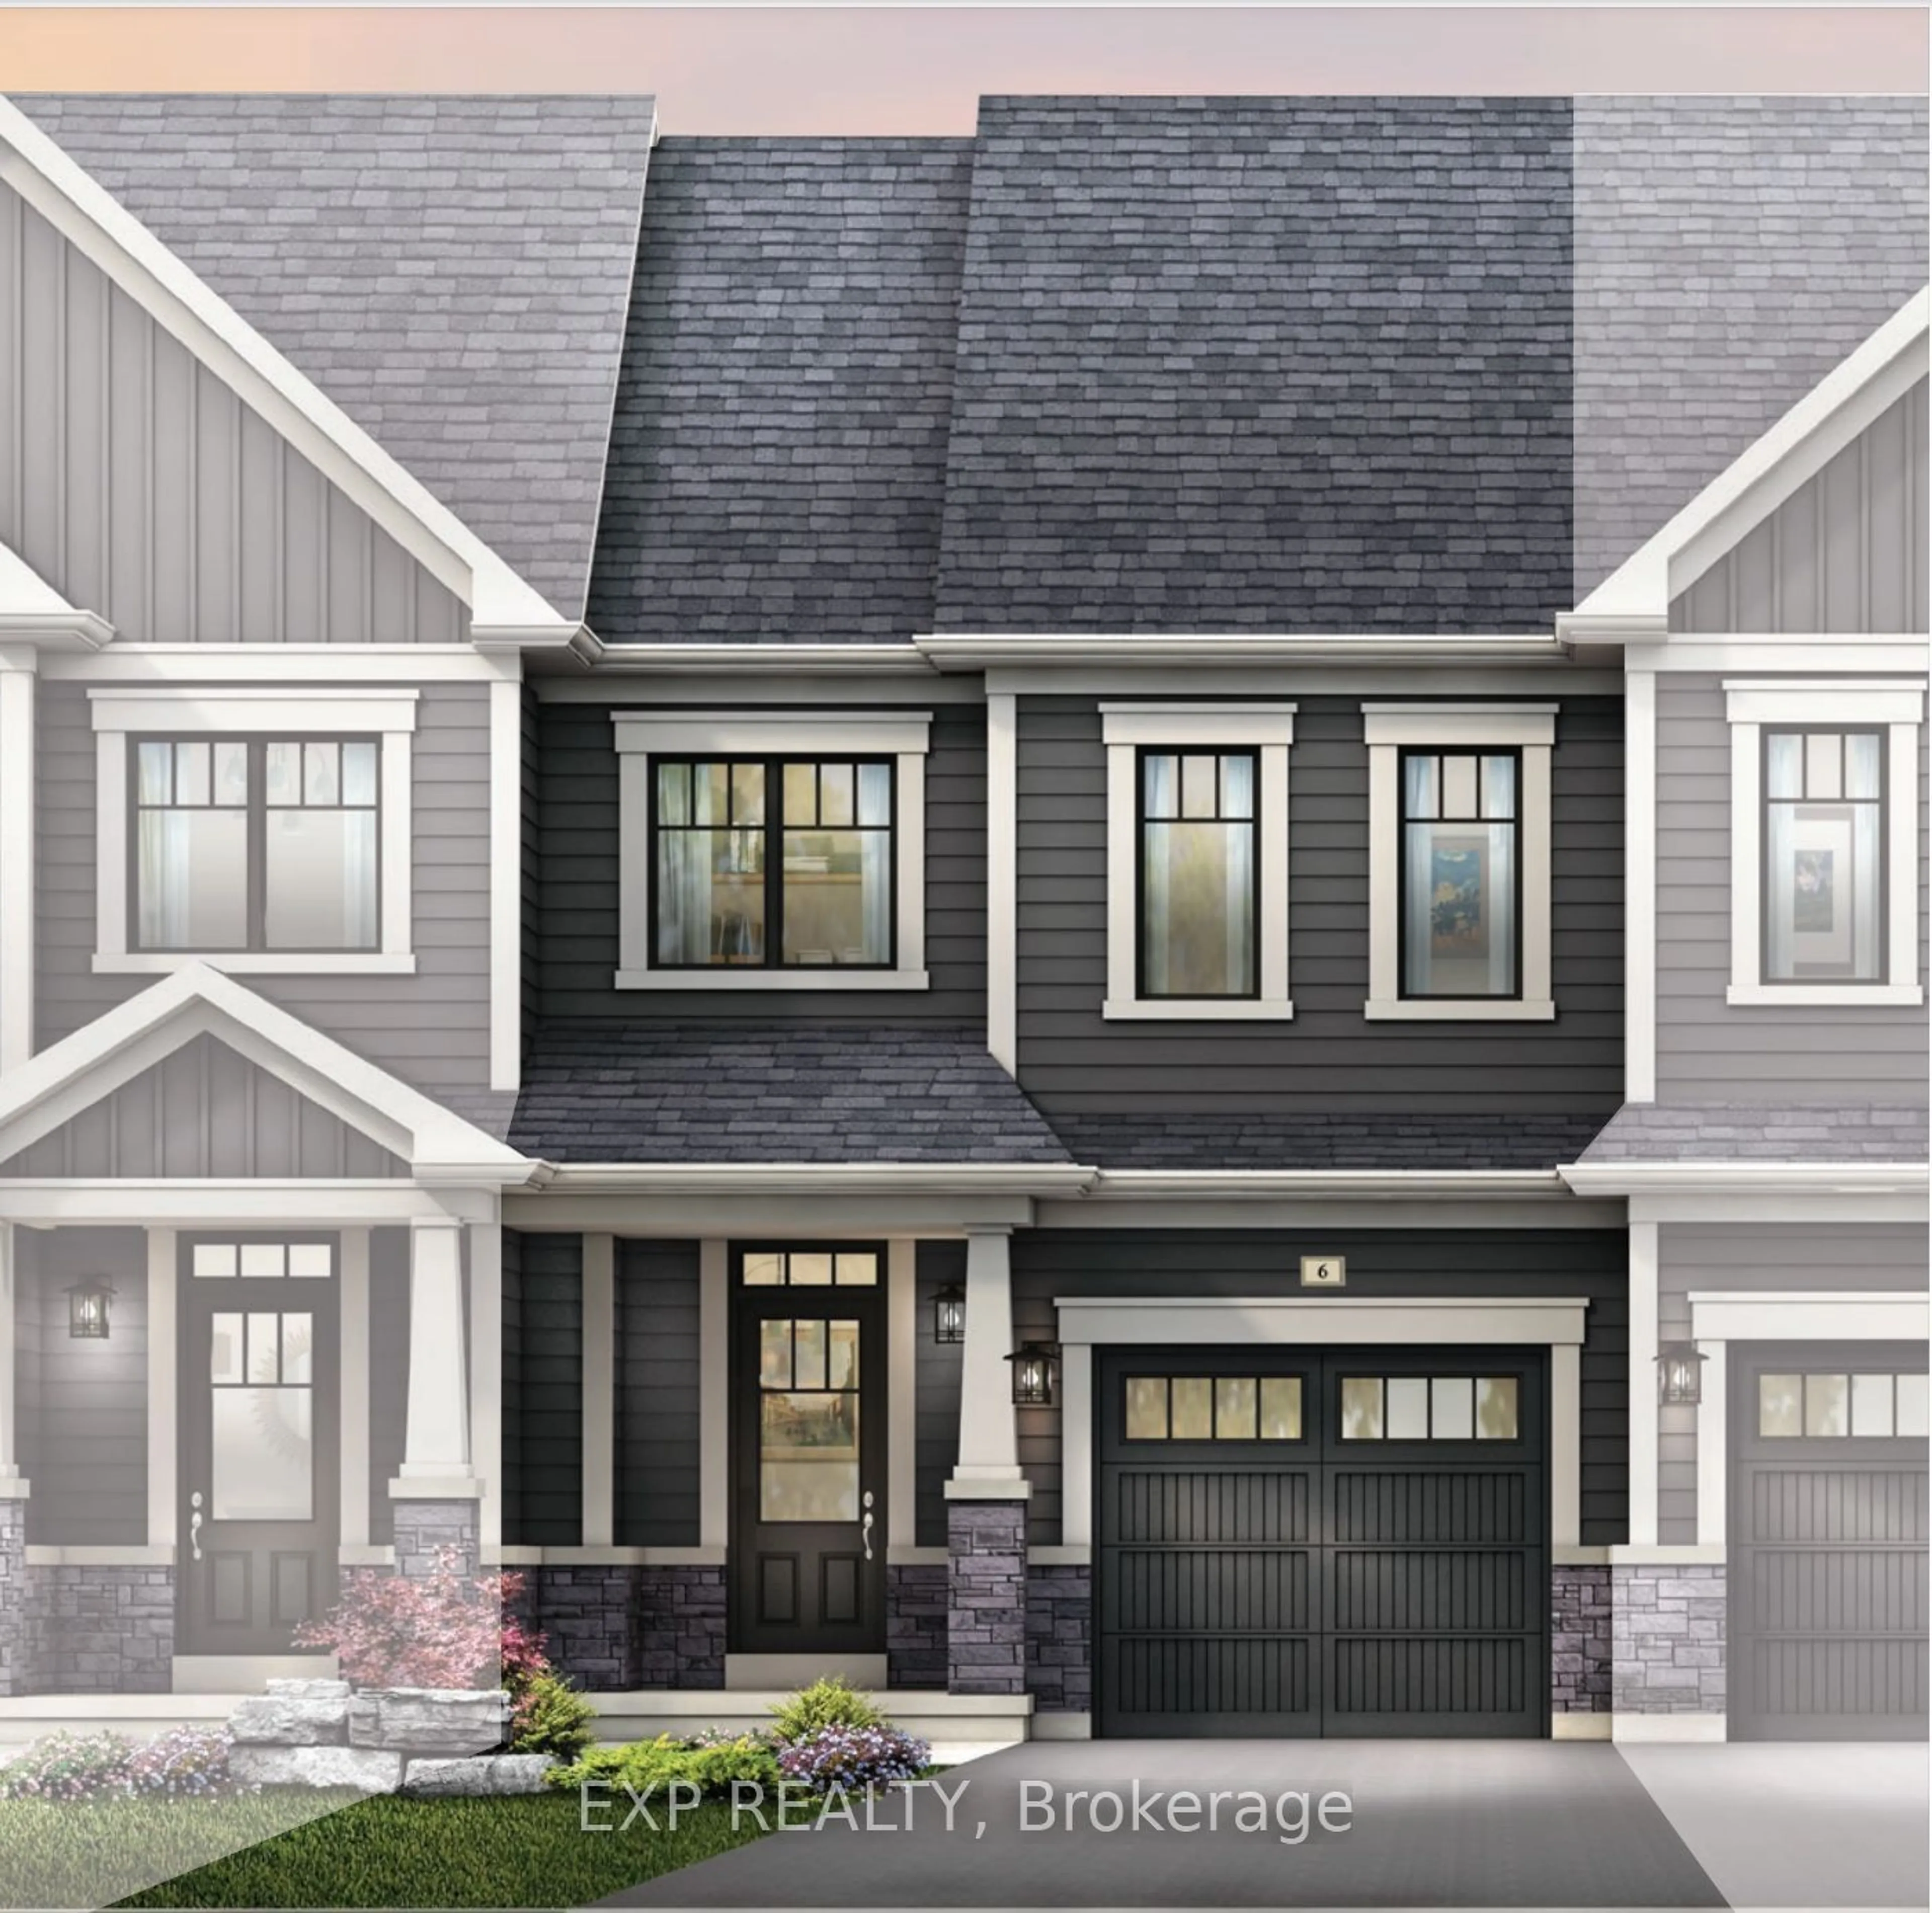 Home with brick exterior material for Lotb236 Phase 3, Calderwood, Thorold Ontario L2V 0B7